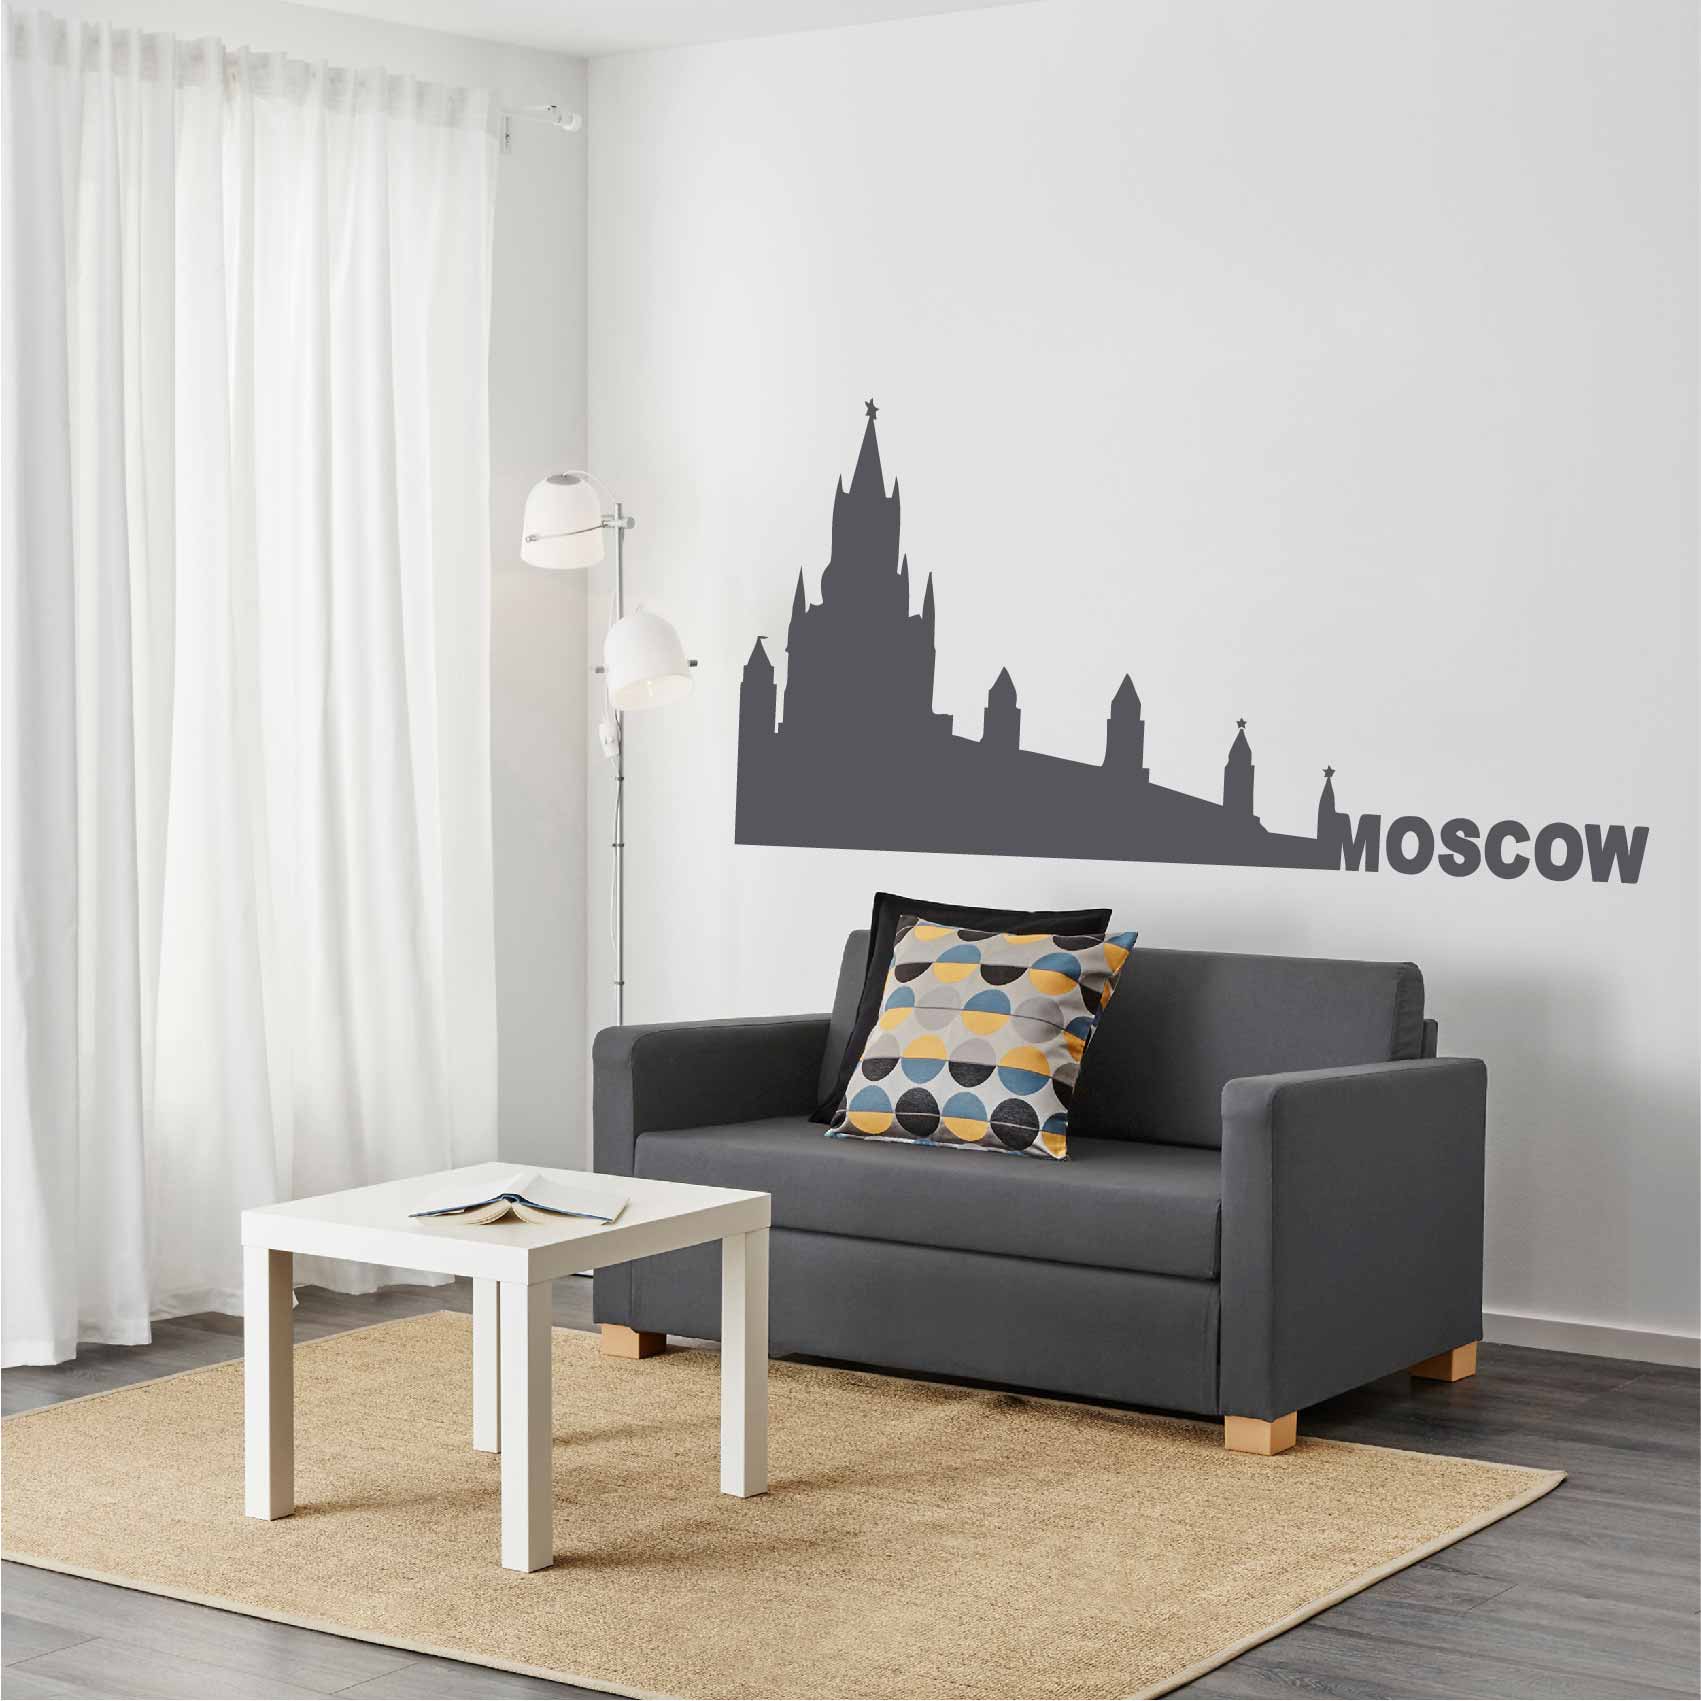 stickers-moscou-ref1moscow-autocollant-muraux-moscow-russie-russia-ville-sticker-voyage-pays-travel-monument-skyline